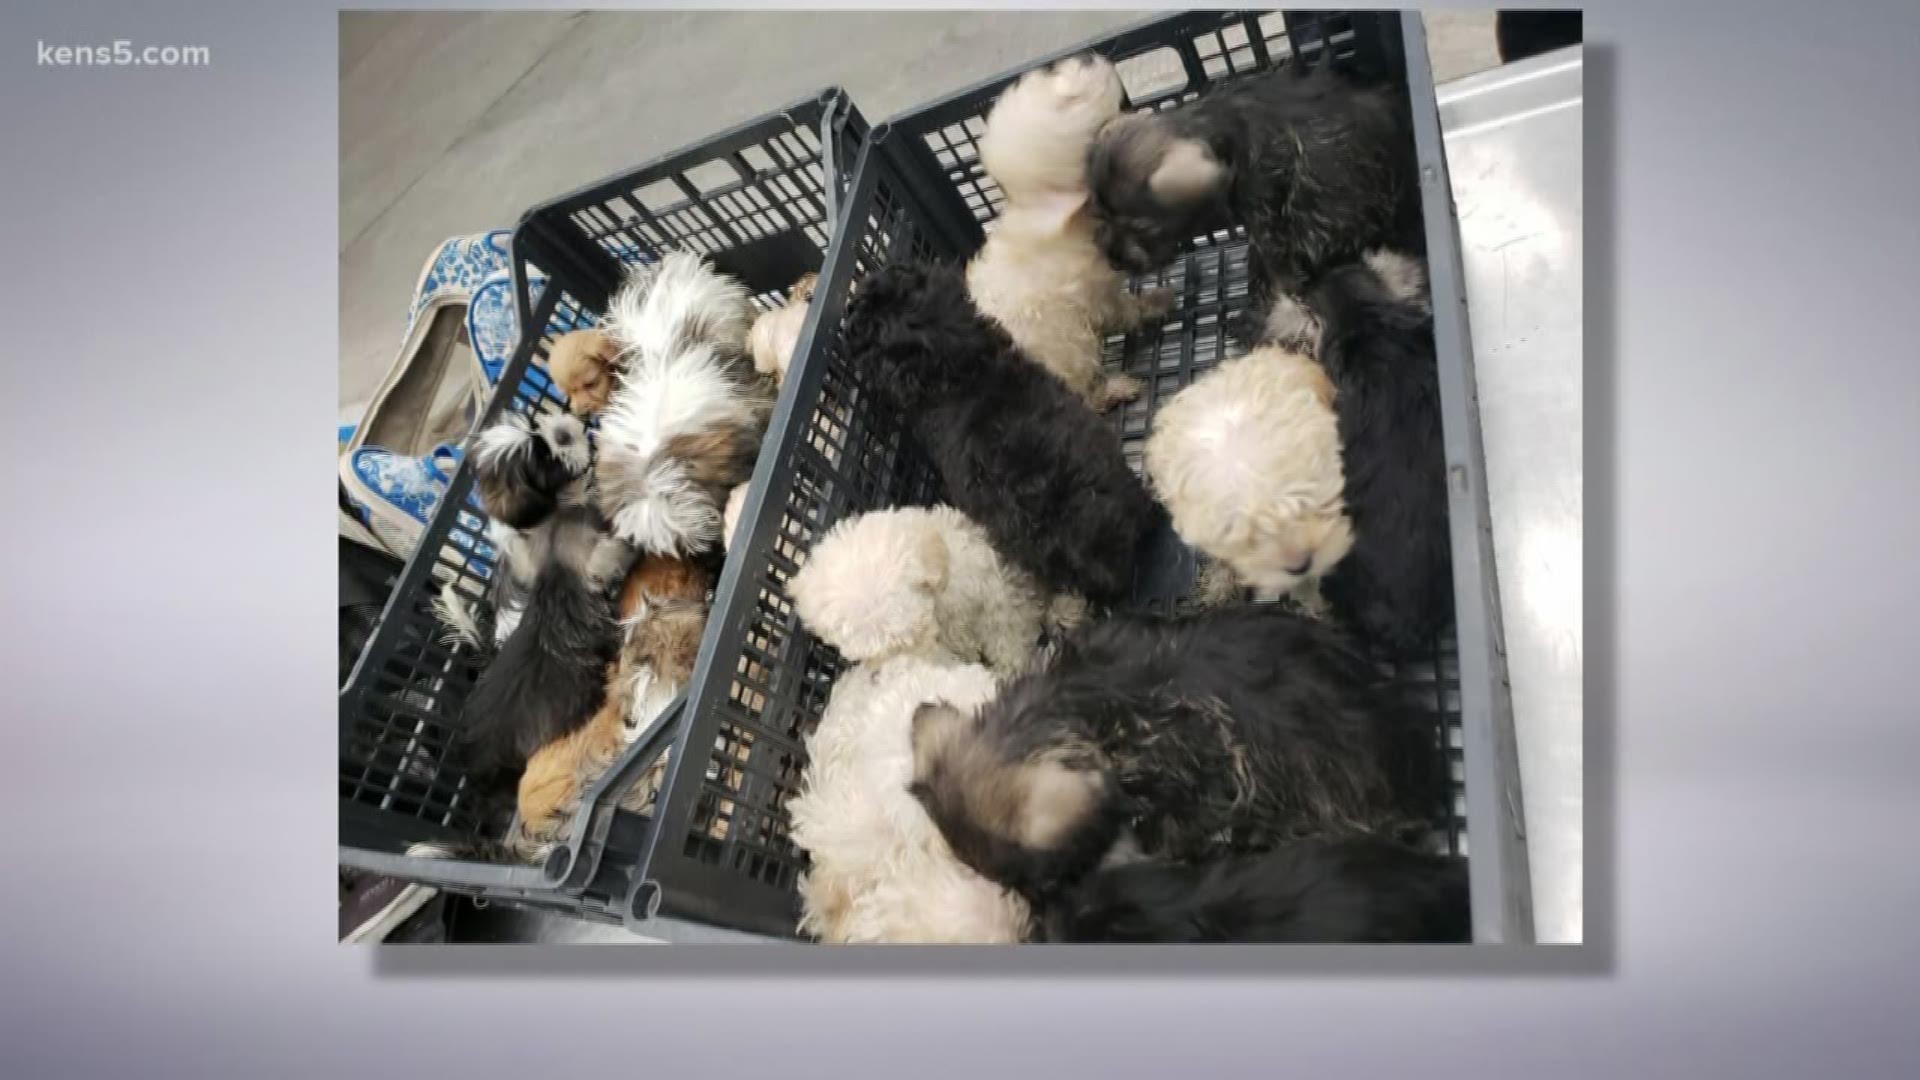 U.S. Customs and Border Protection officers stopped a U.S. citizen who was trying to bring the puppies in three duffel bags.